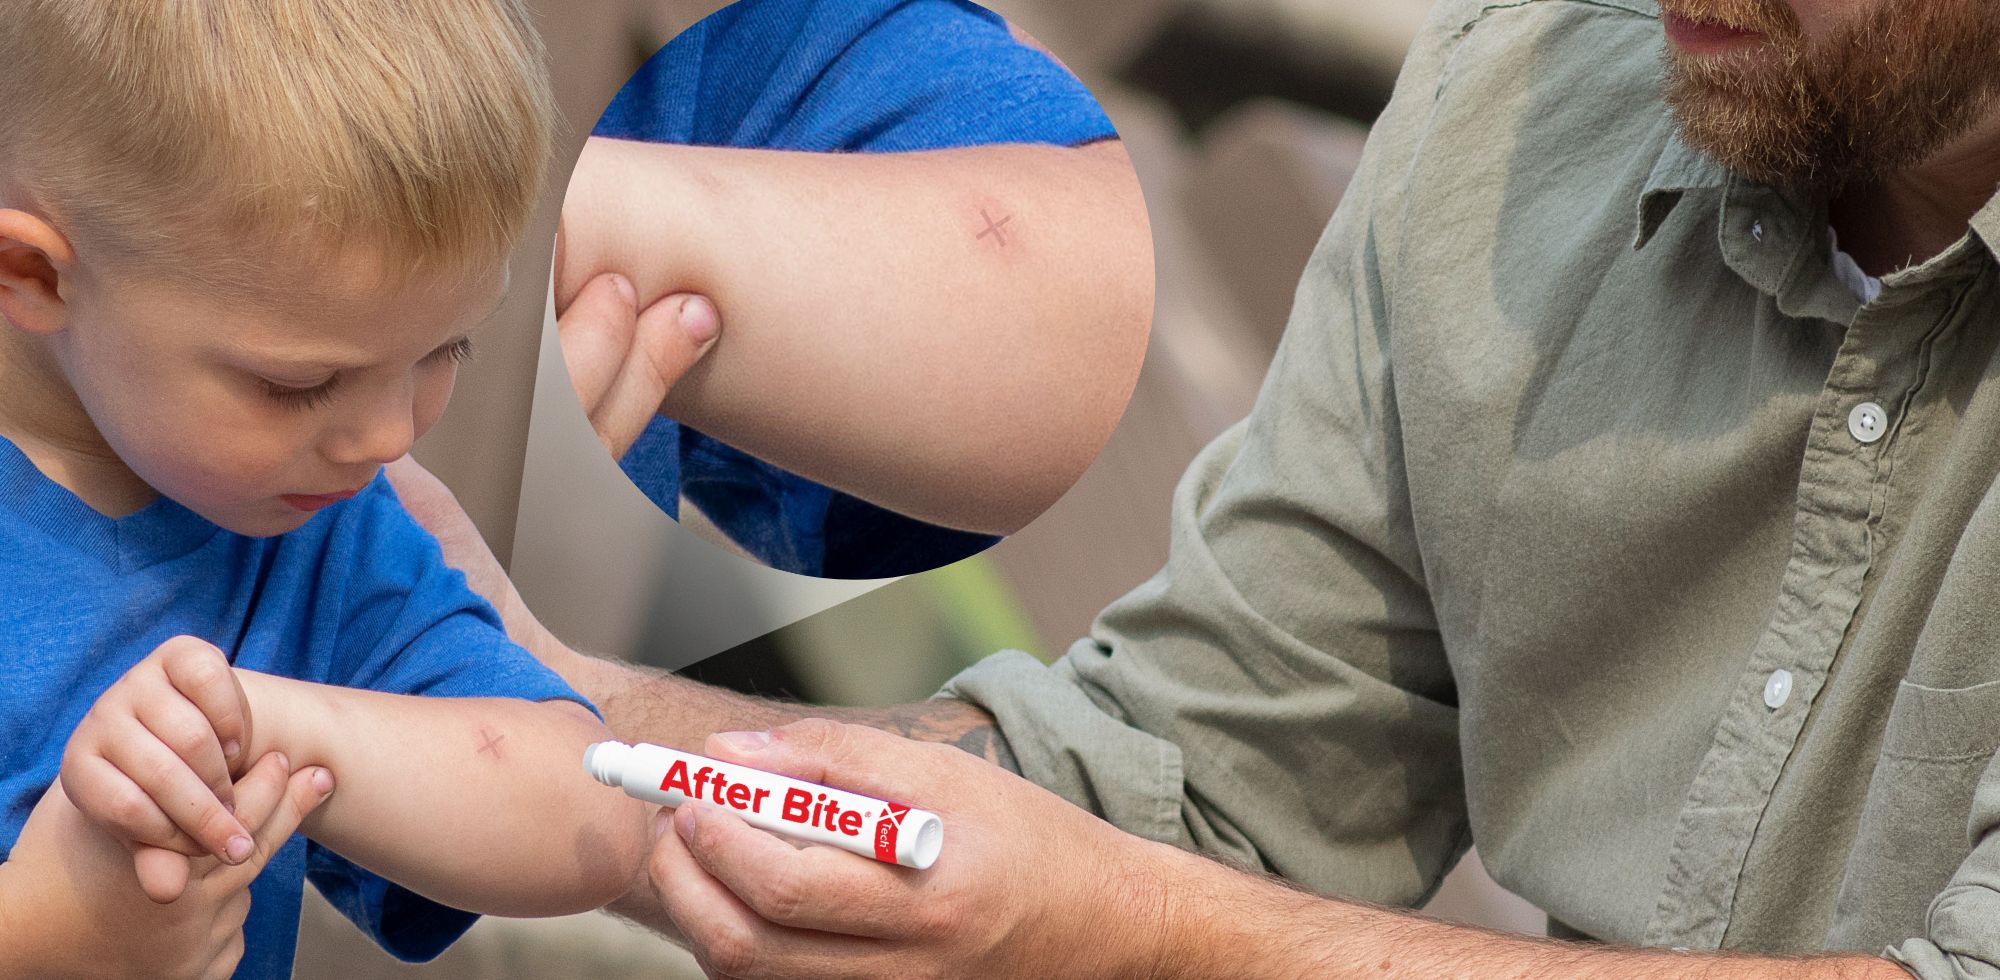 Man using After Bite X-Tech on little boy with close up of X on arm